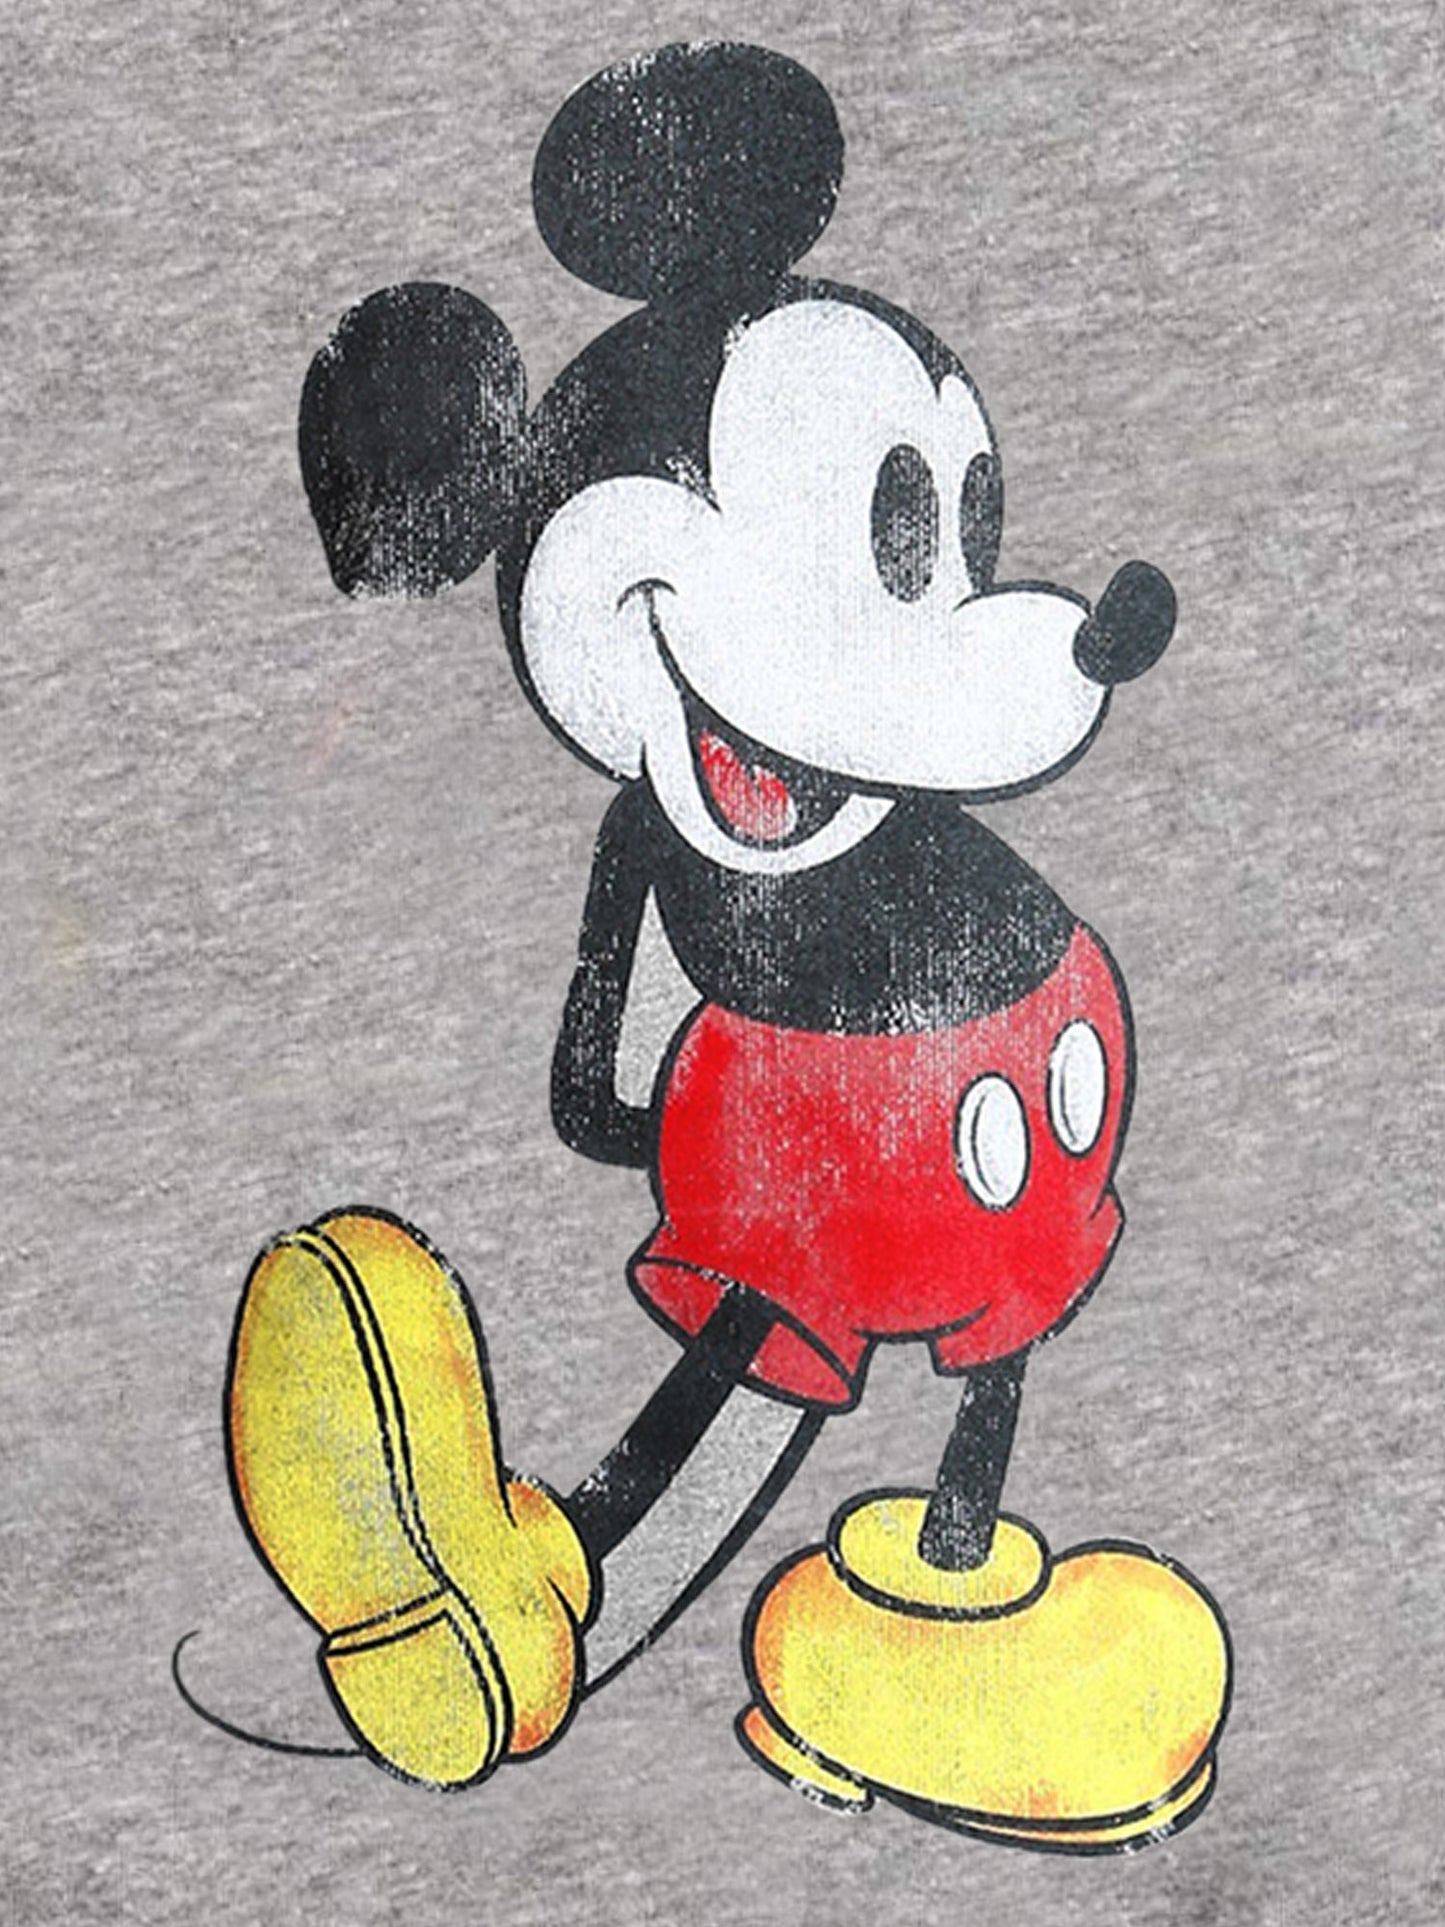 Boys Disney Classic Mickey Mouse T-Shirt Short Sleeve Distressed (XS Only)